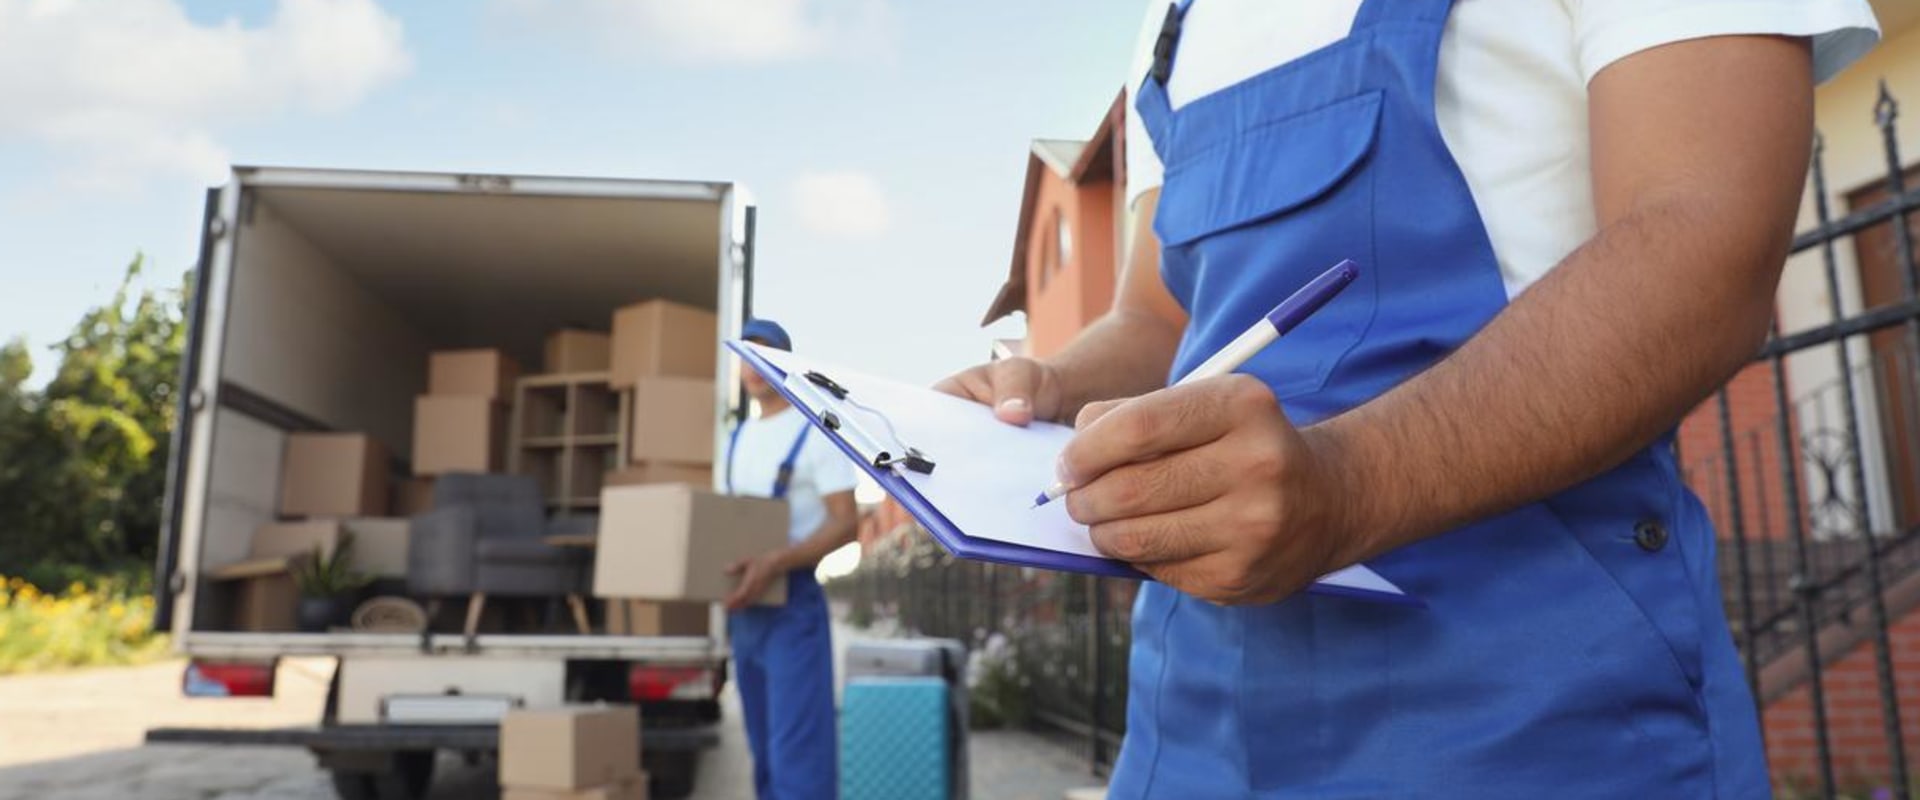 What should i look for when choosing a moving service in dublin?